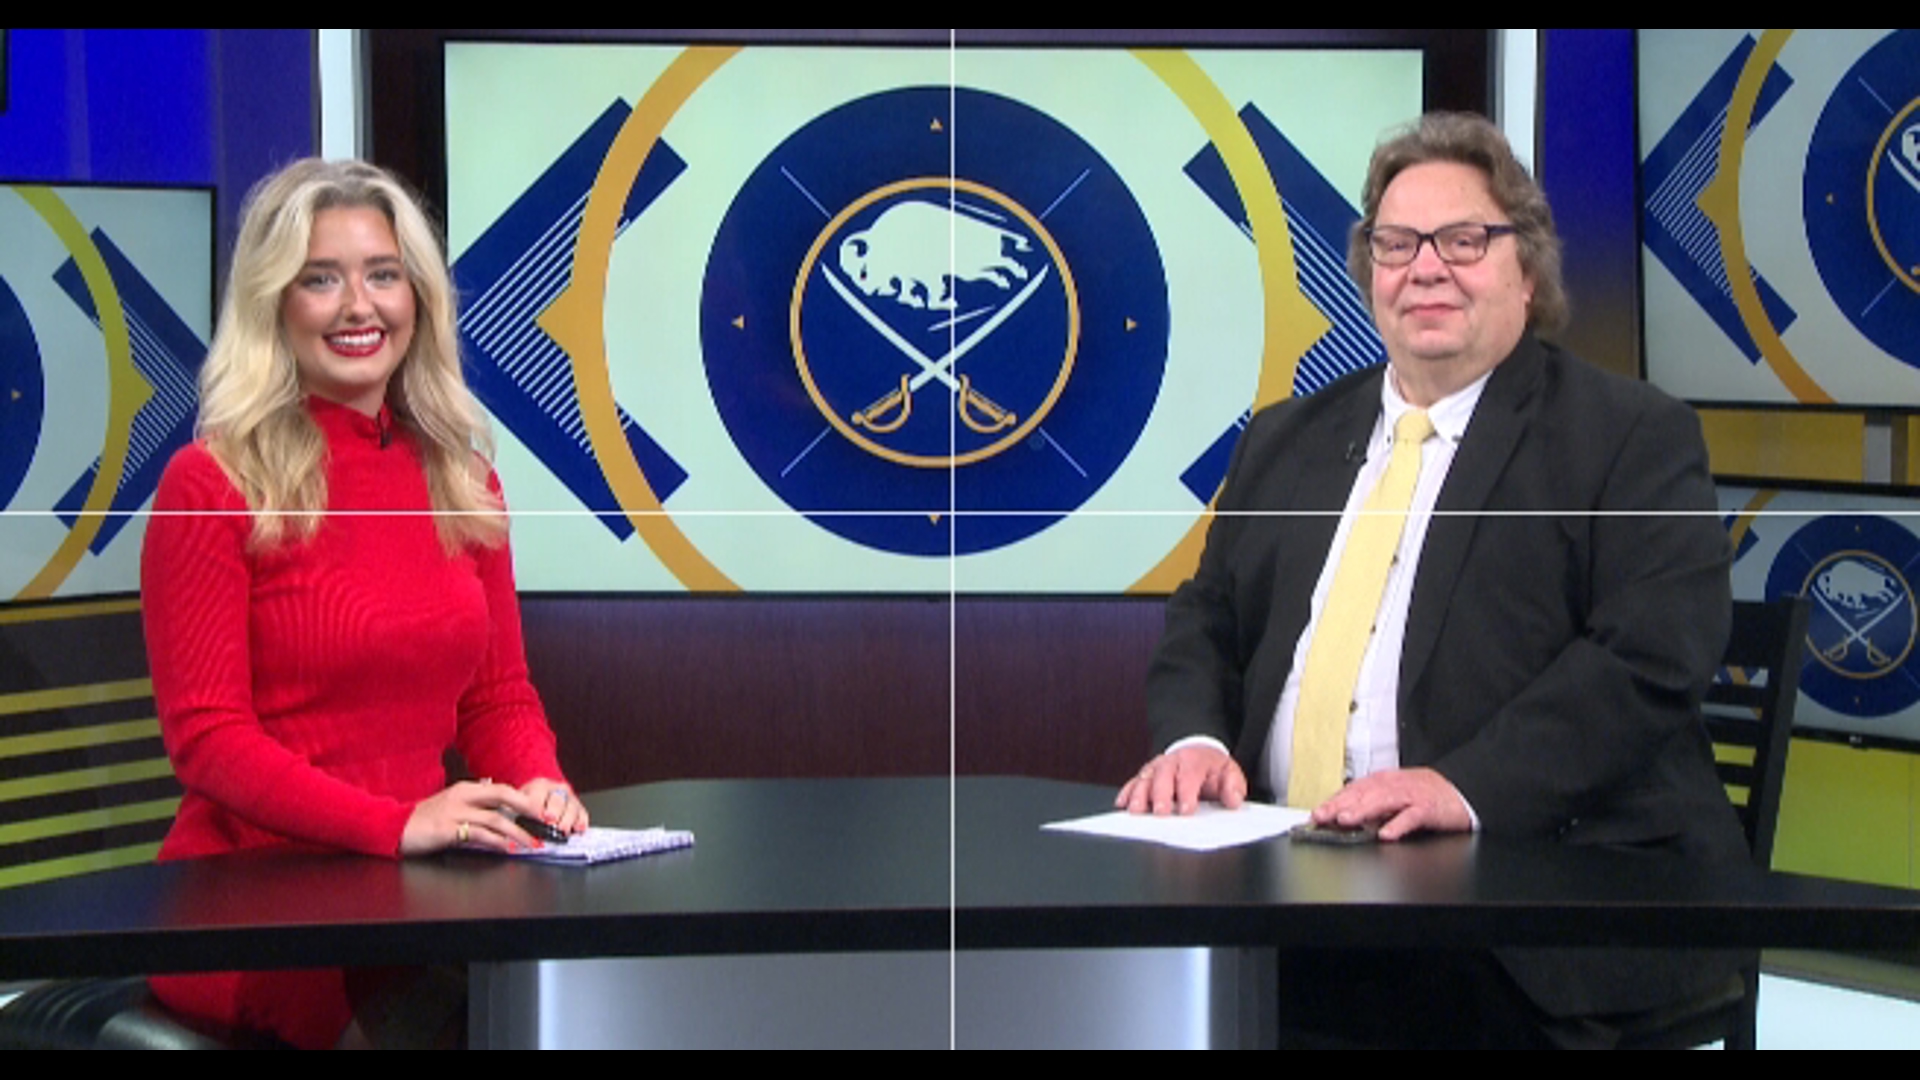 WGRZ sports reporter Lindsey Moppert and Sabres/NHL insider Paul Hamilton discuss how a few Sabres players performed at the IIHF World Championship.